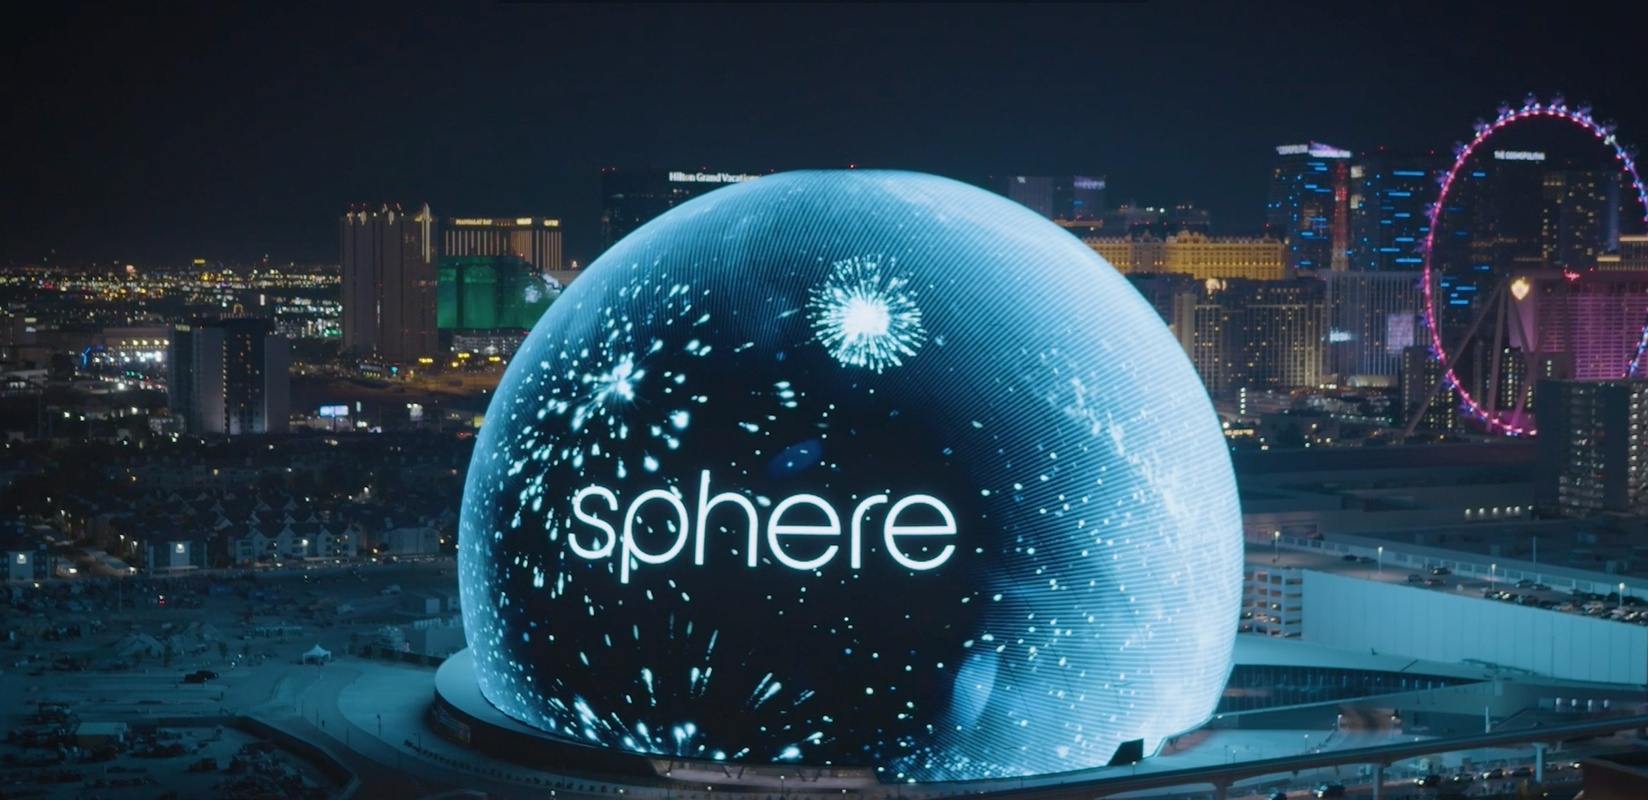 The Sphere: A New Dimension in Las Vegas Entertainment